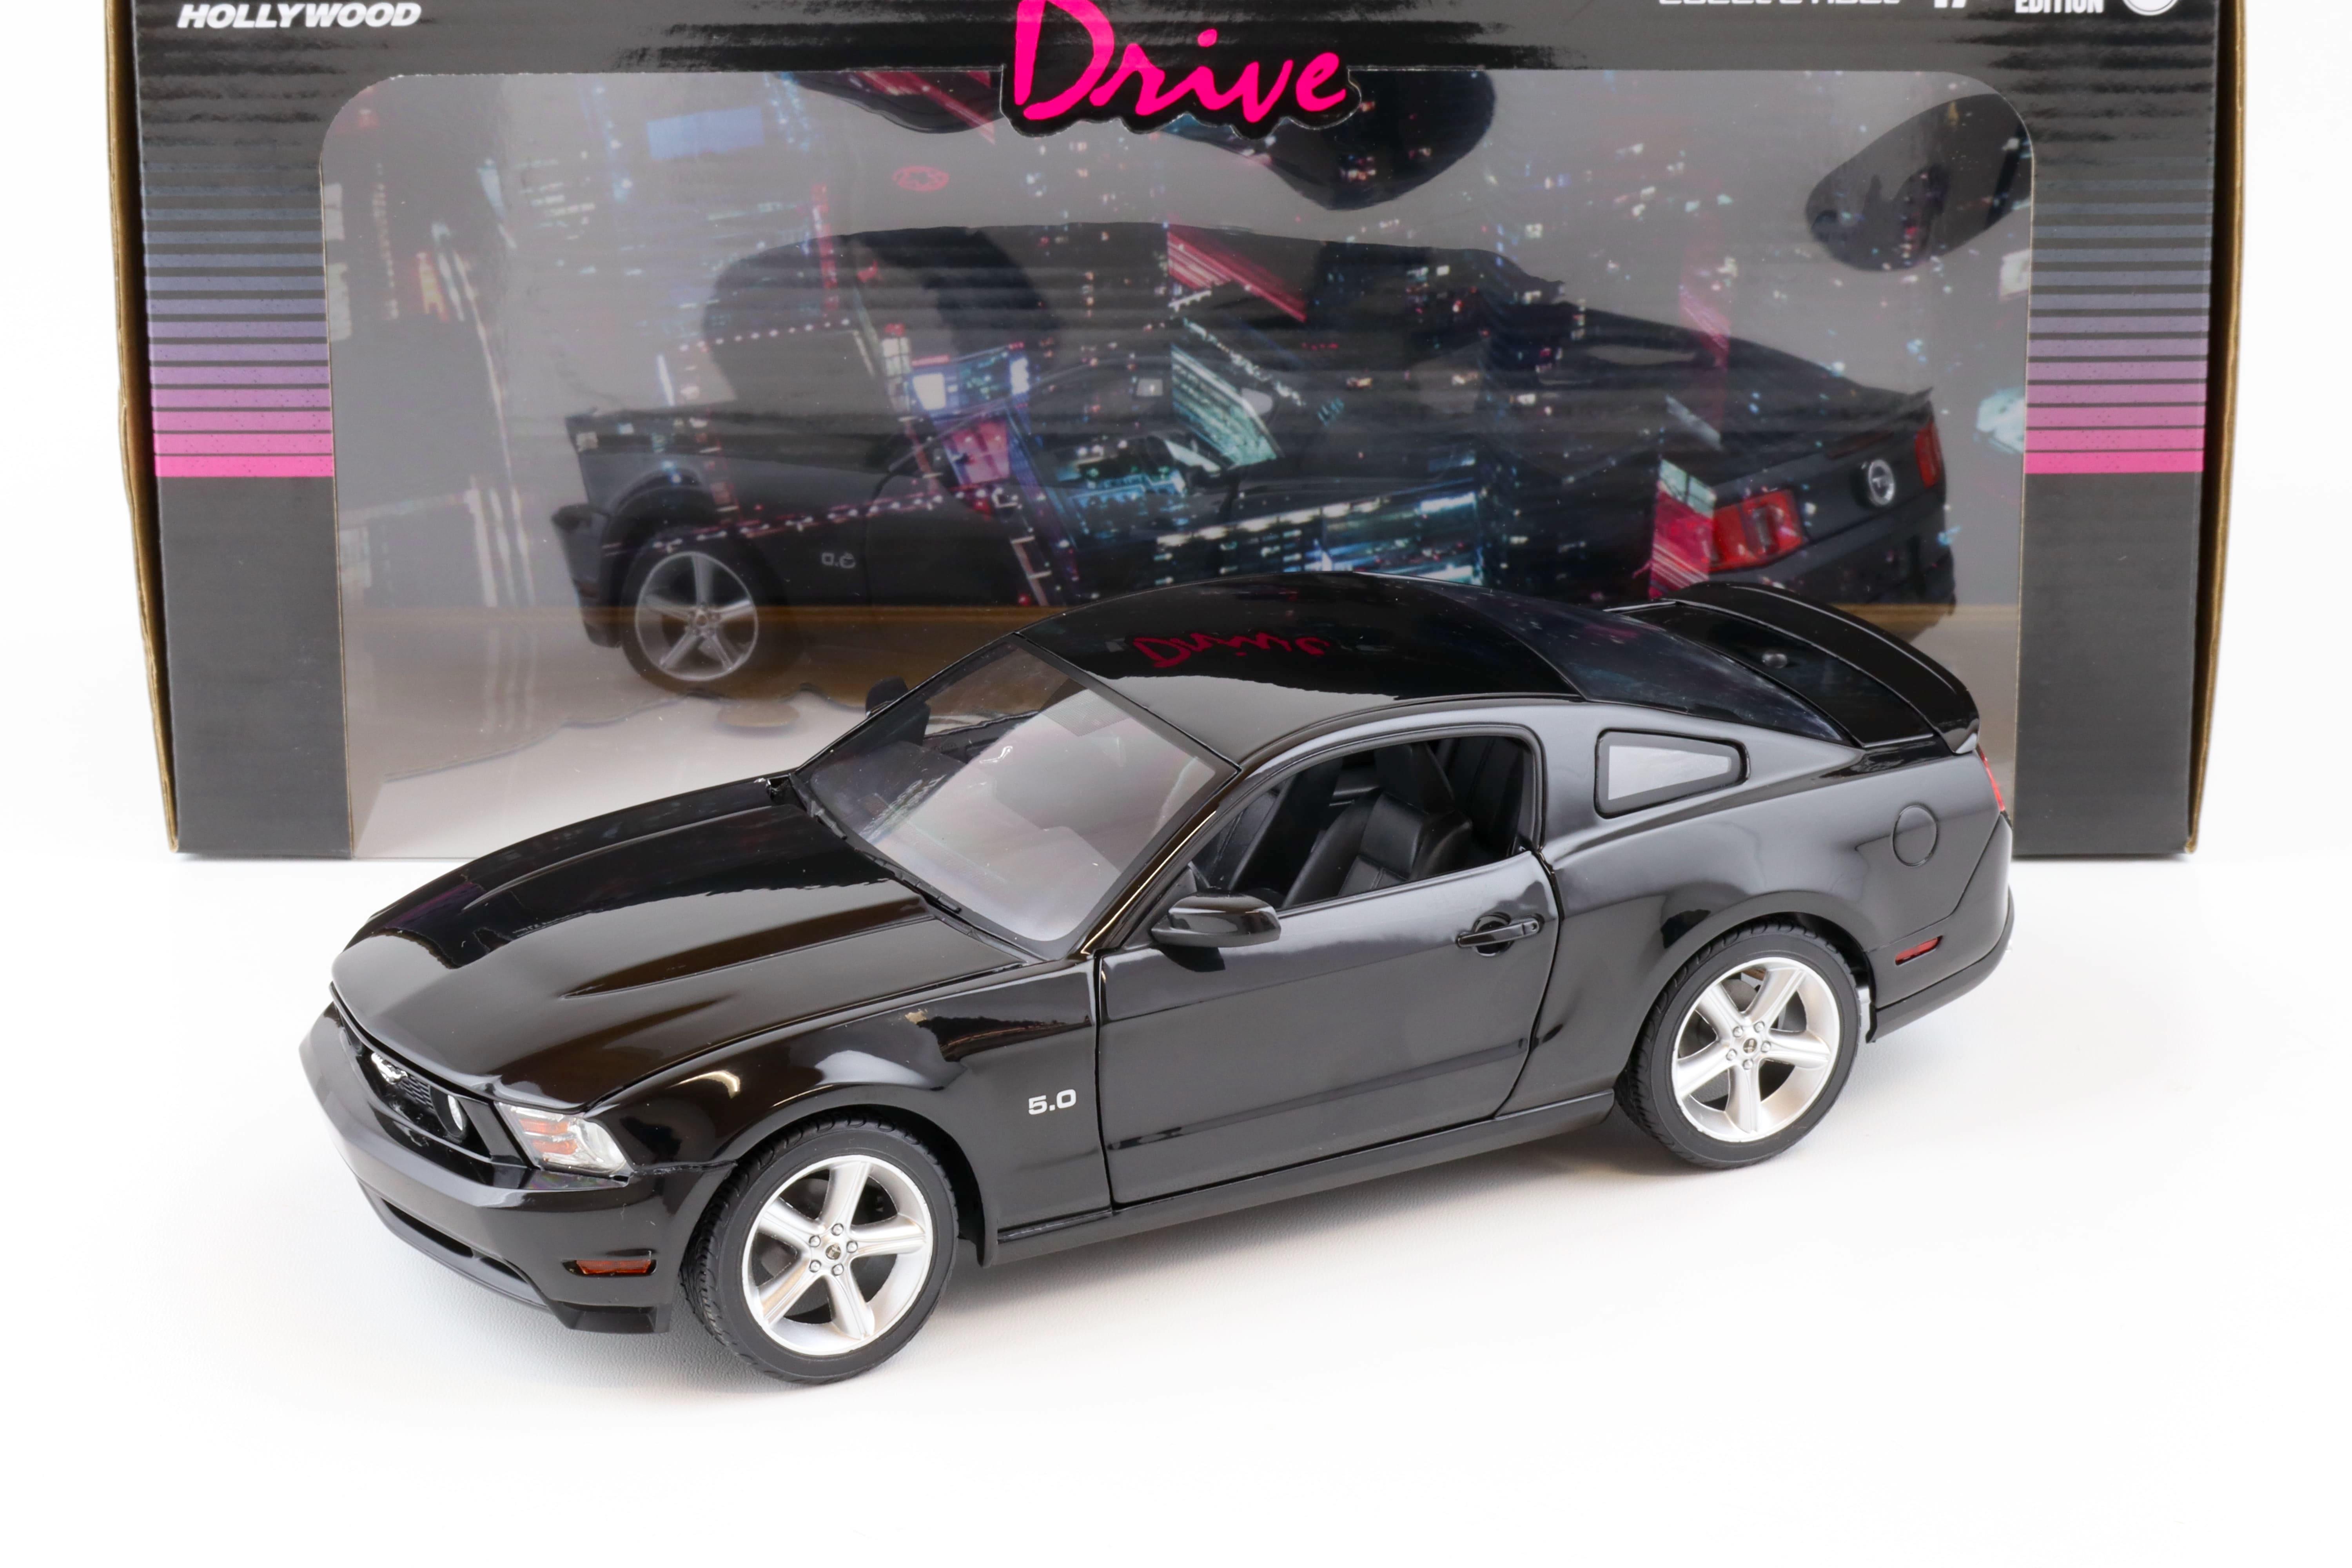 1:18 Greenlight 2011 Ford Mustang GT 5.0 Coupe black DRIVE 2011